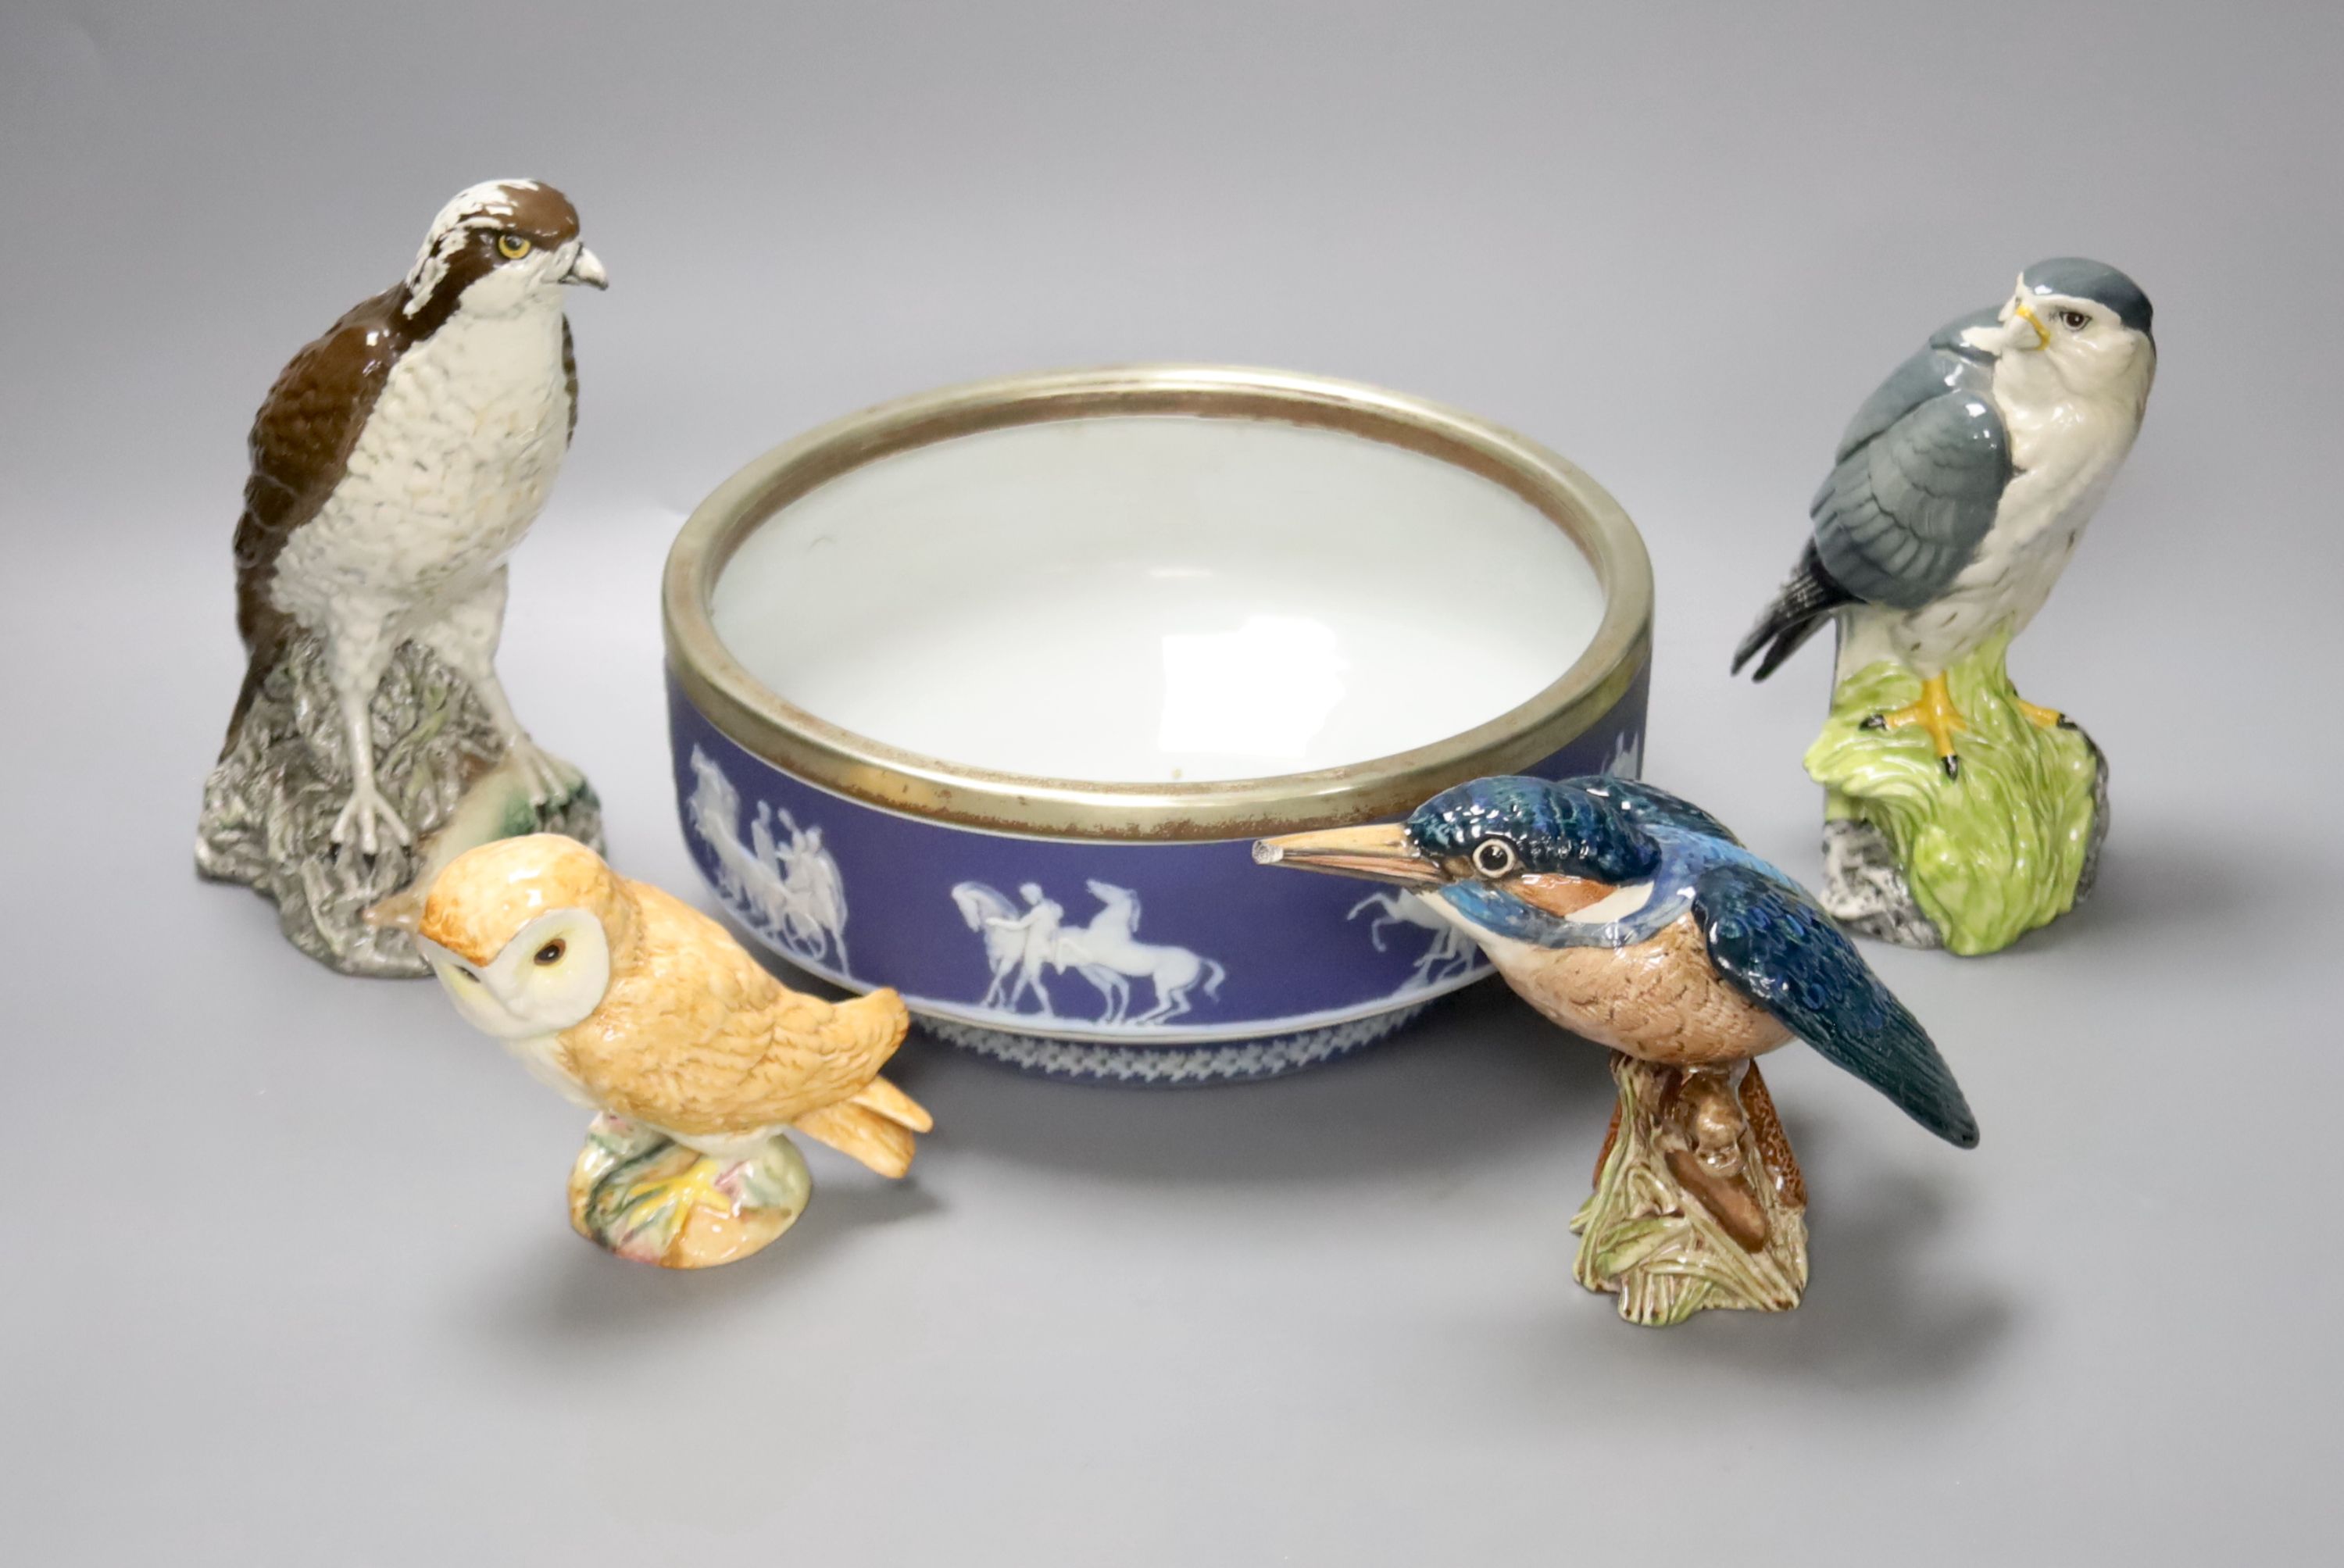 Three Beswick bird figures, a Royal Doulton Whyte & Mackay Scotch Whisky 'Merlin' figure, together with a large Wedgwood jasperware type bowl with silver plated collar